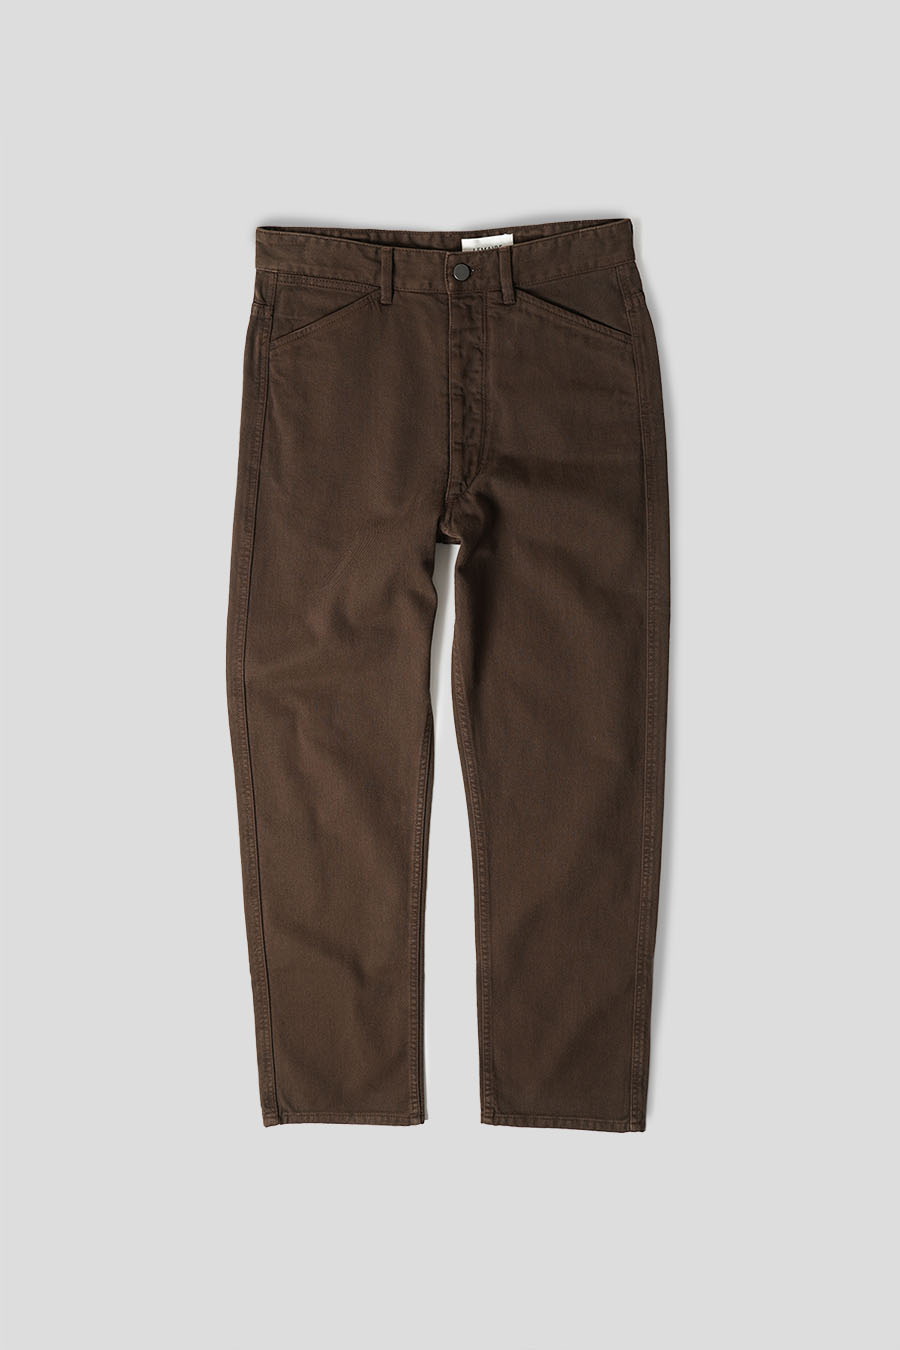 LEMAIRE - CURVED 5-POCKET ESPRESSO TROUSERS - LE LABO STORE